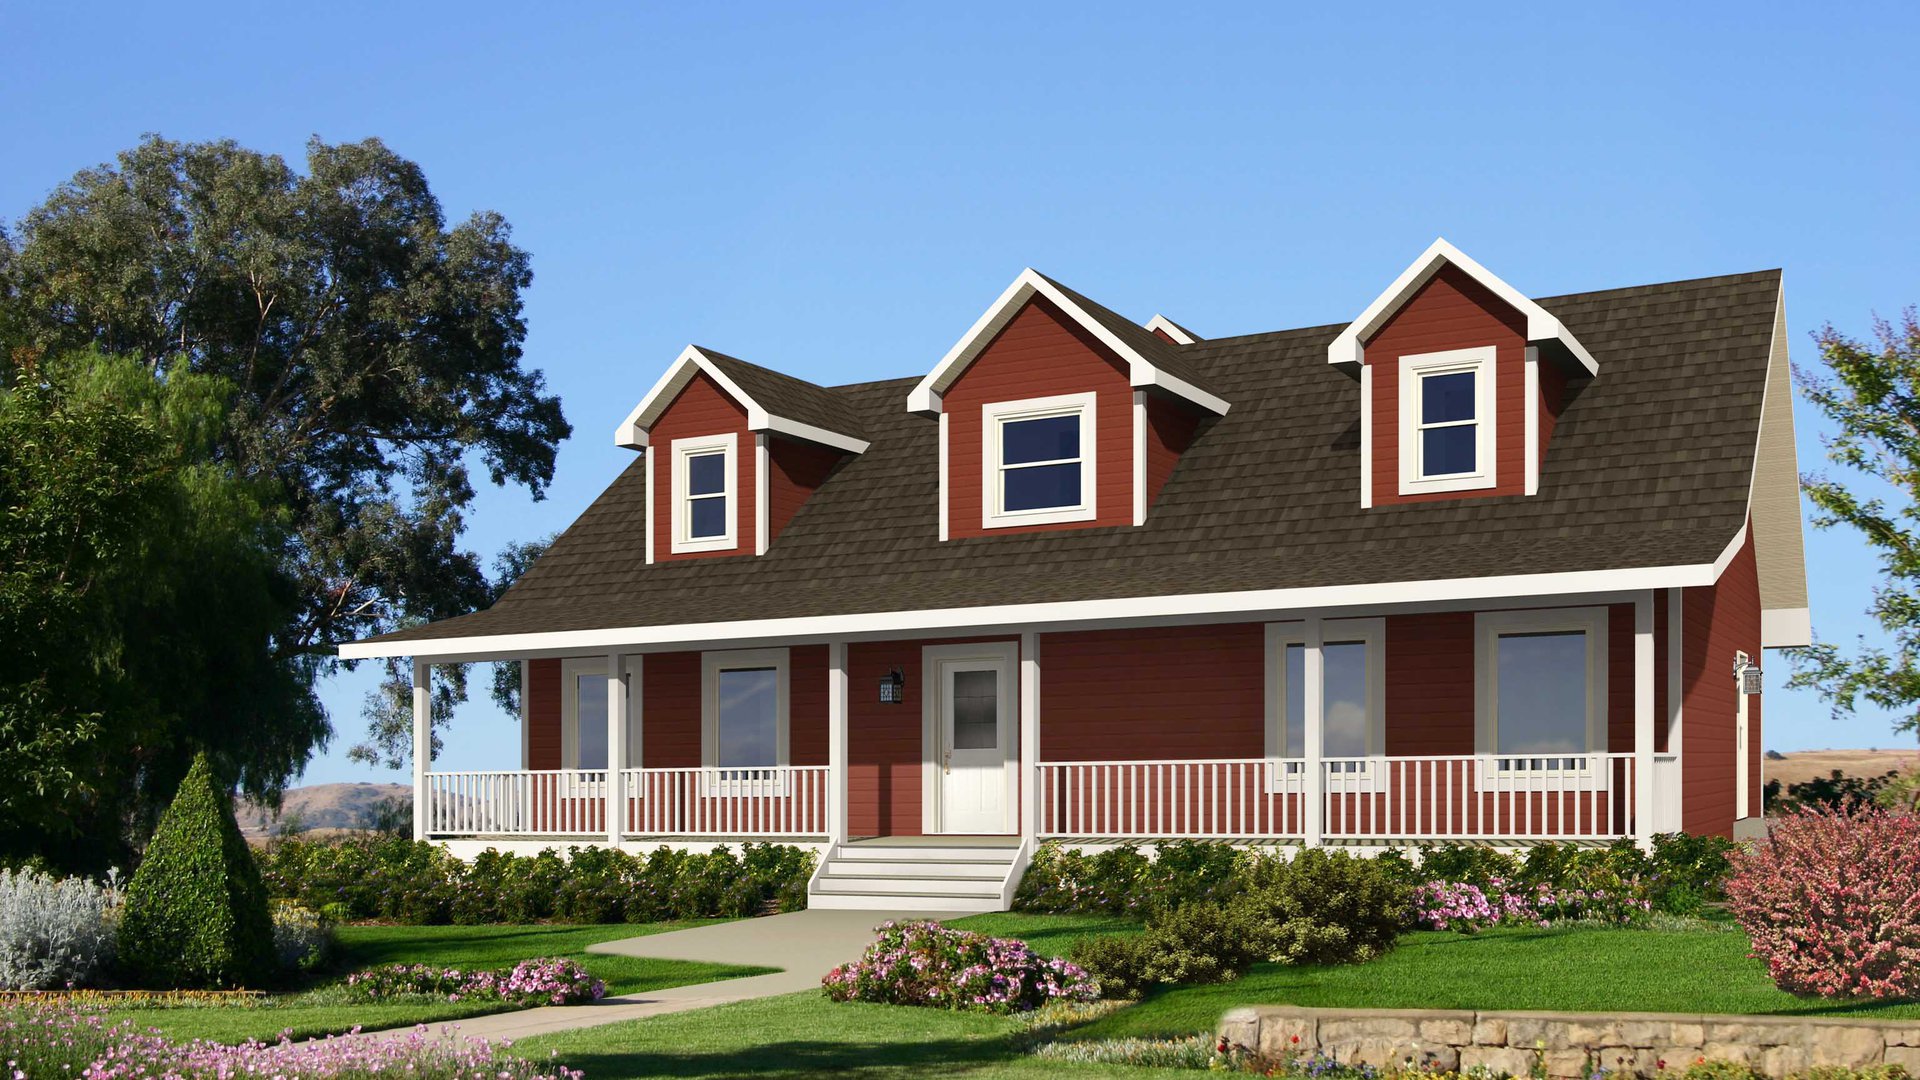 hampton house plan modular homes nelson homes ready to move prefabricated home packages.jpg